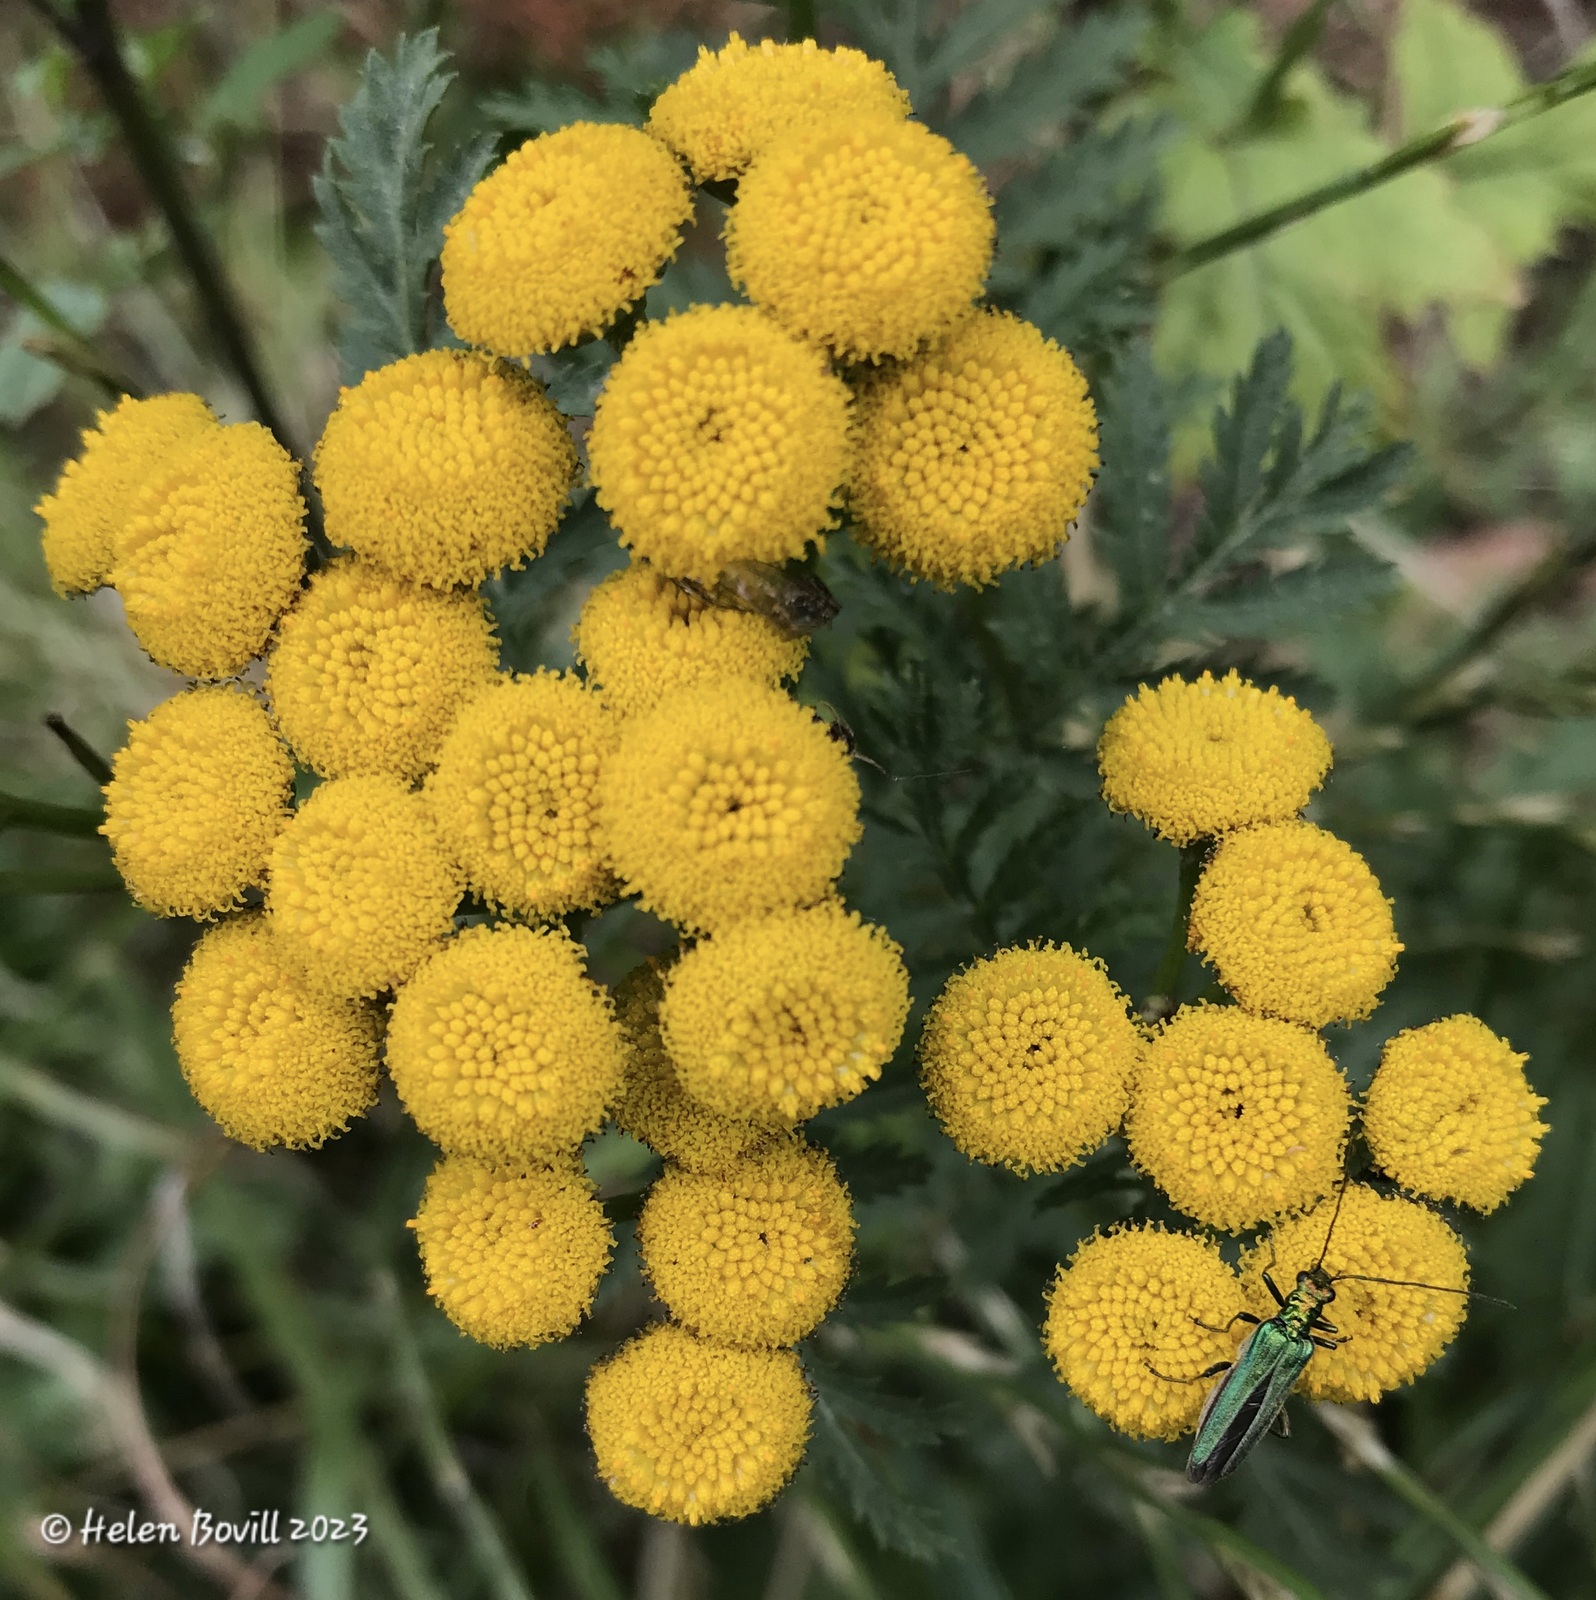 The yellow flower of the Tansy plant, with a Thick-legged Flower Beetle resting on it